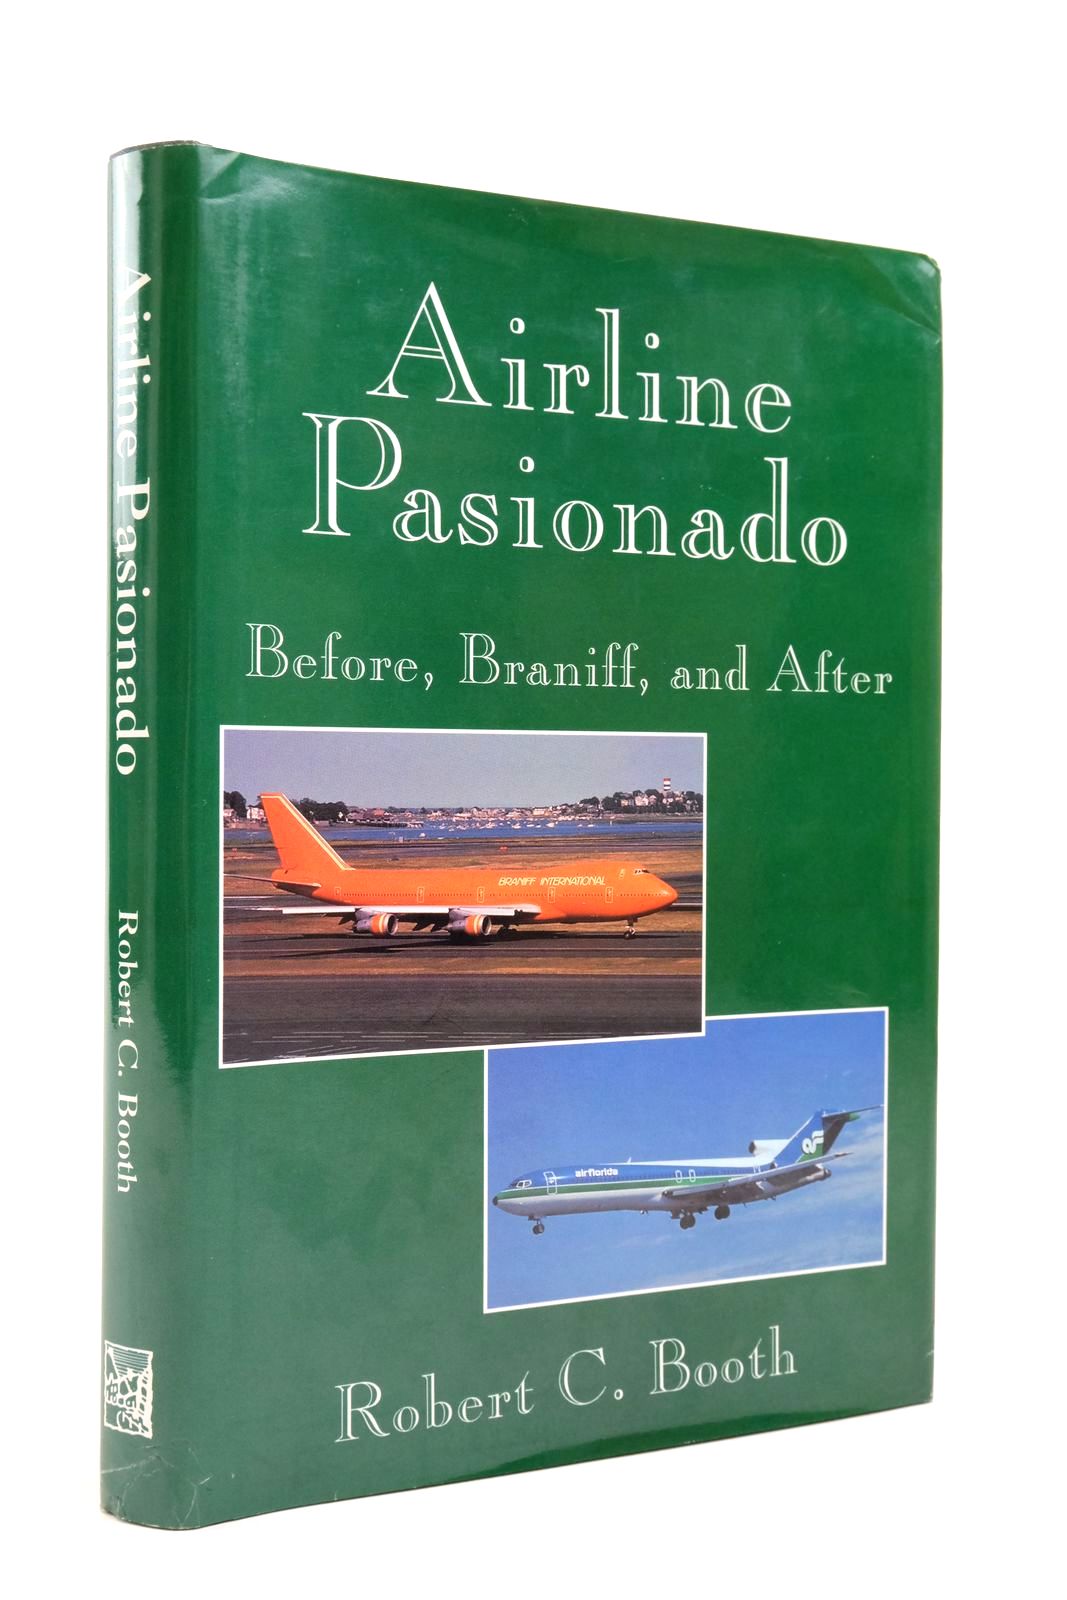 Photo of AIRLINE PASIONADO: BEFORE, BRANIFF, AND AFTER written by Booth, Robert C. published by Paladwr Press (STOCK CODE: 2138428)  for sale by Stella & Rose's Books